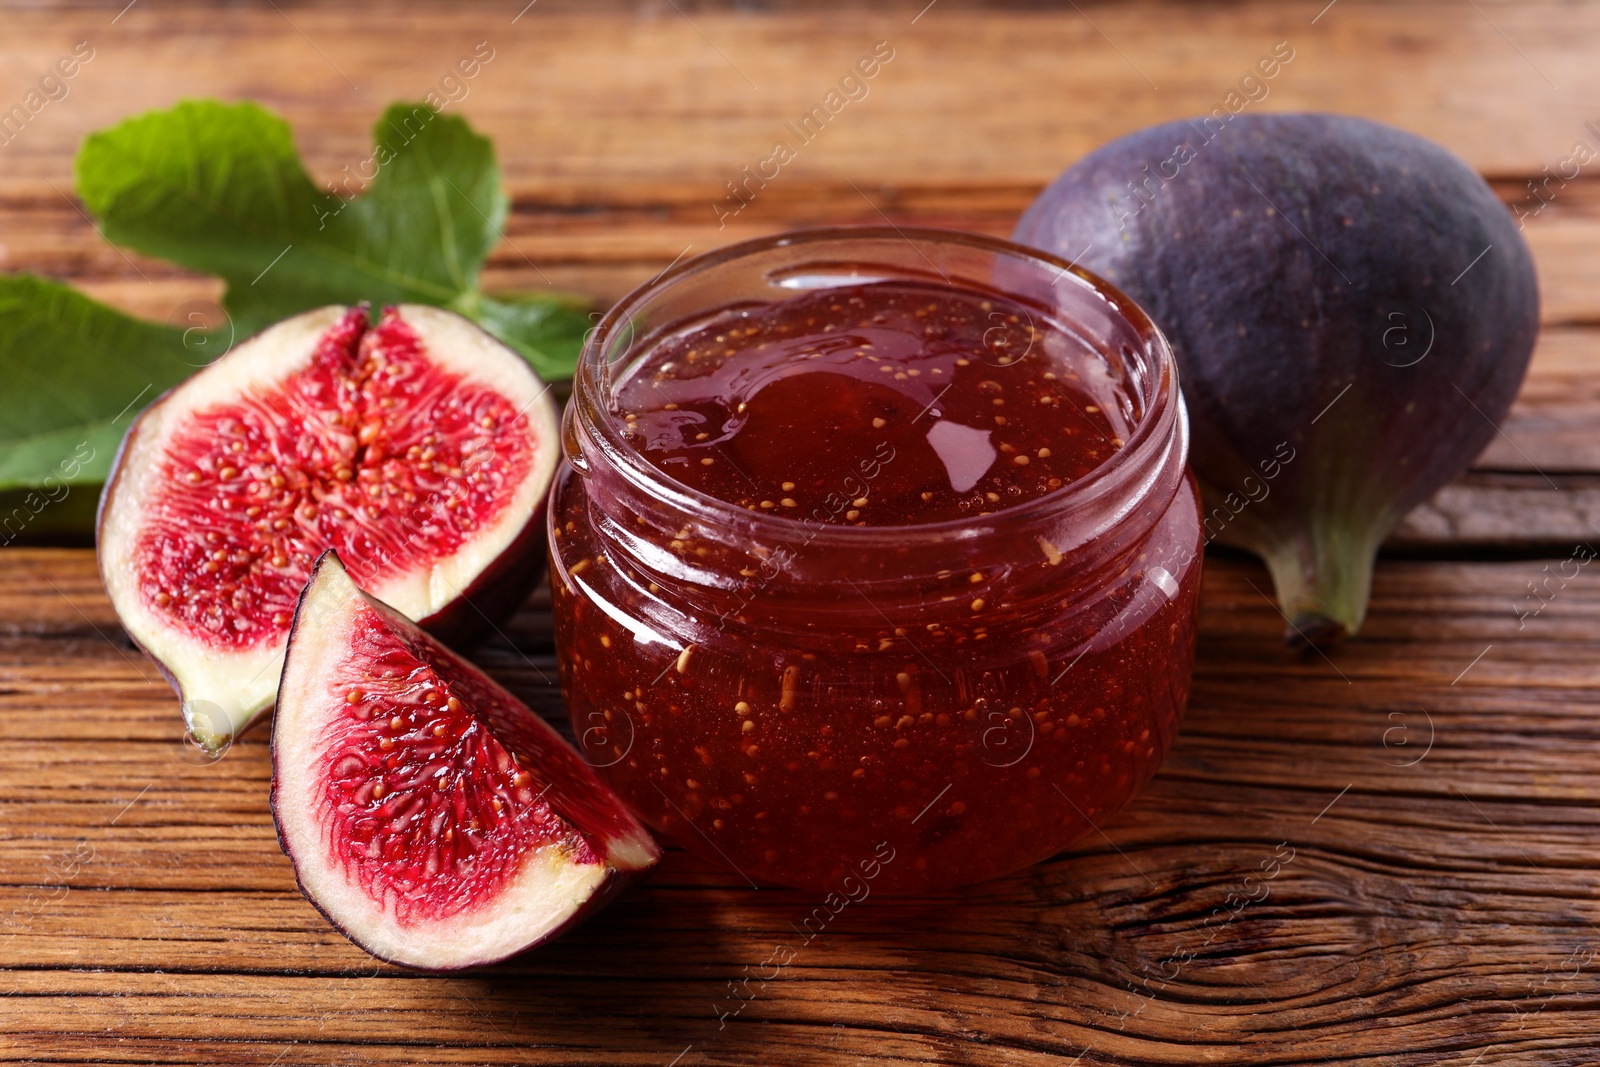 Photo of Jar of tasty sweet jam and fresh figs on wooden table, closeup